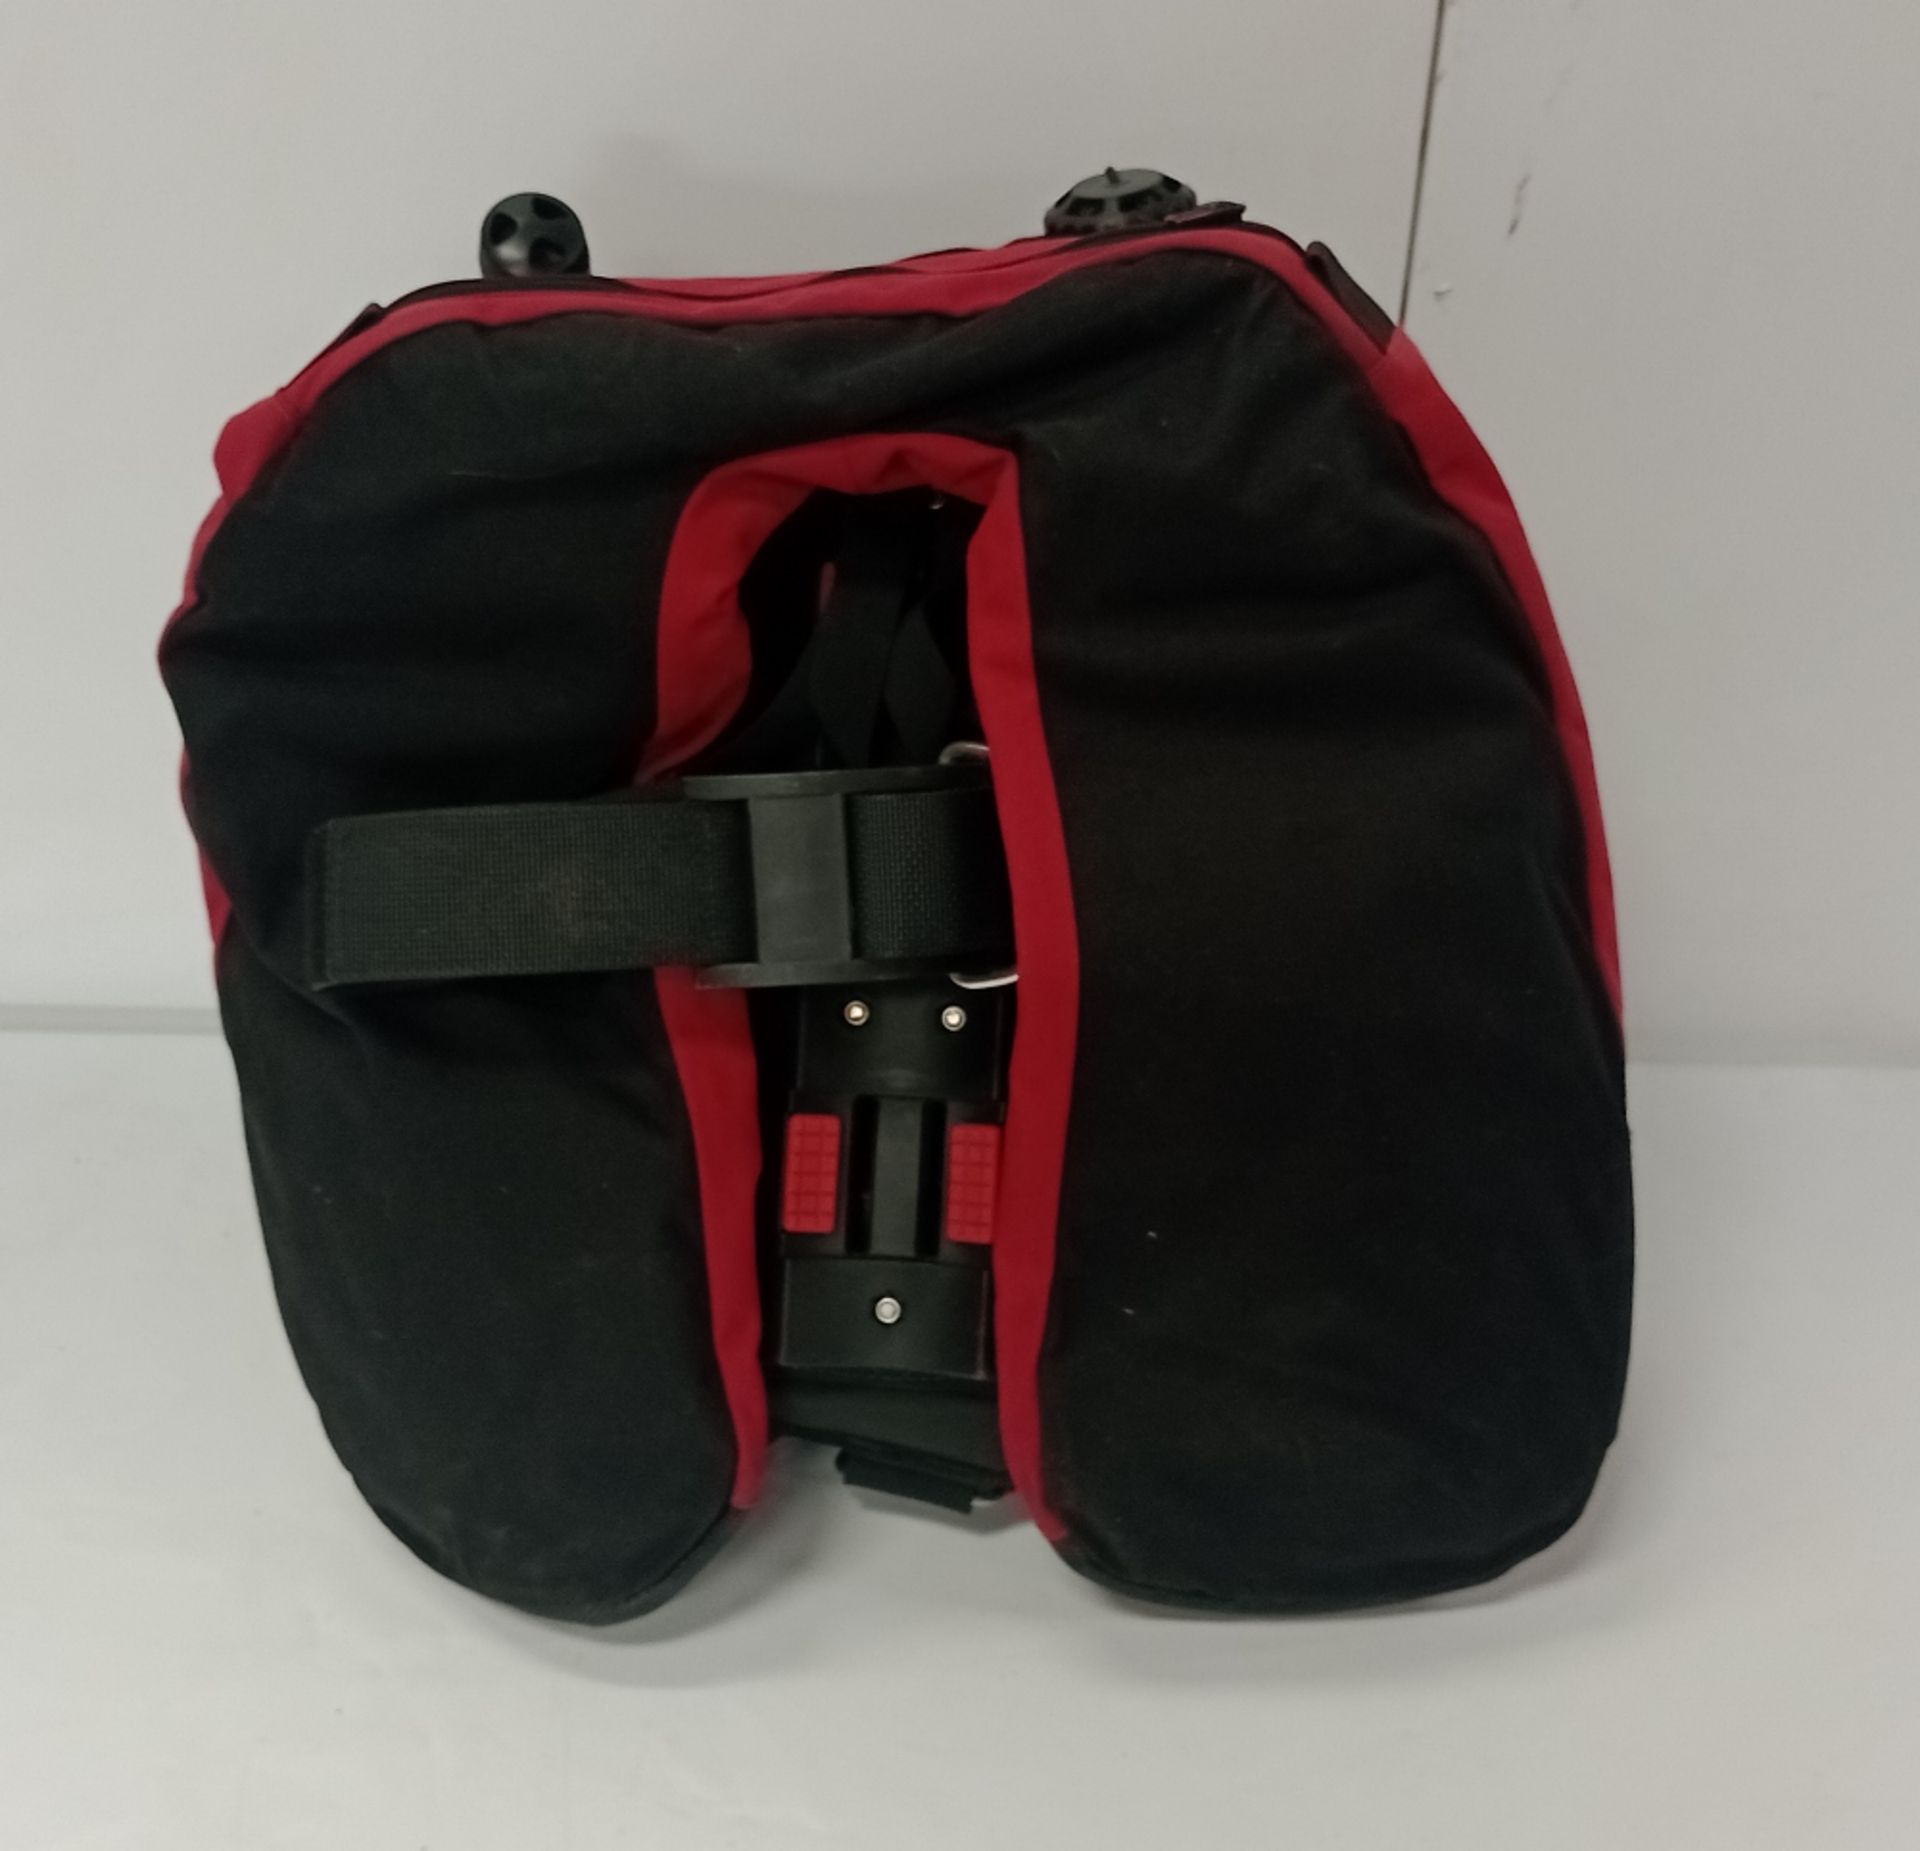 Hollis HD200 Buoyancy Control Device, Size S (Location: Brentwood. Please Refer to General Notes) - Image 3 of 5